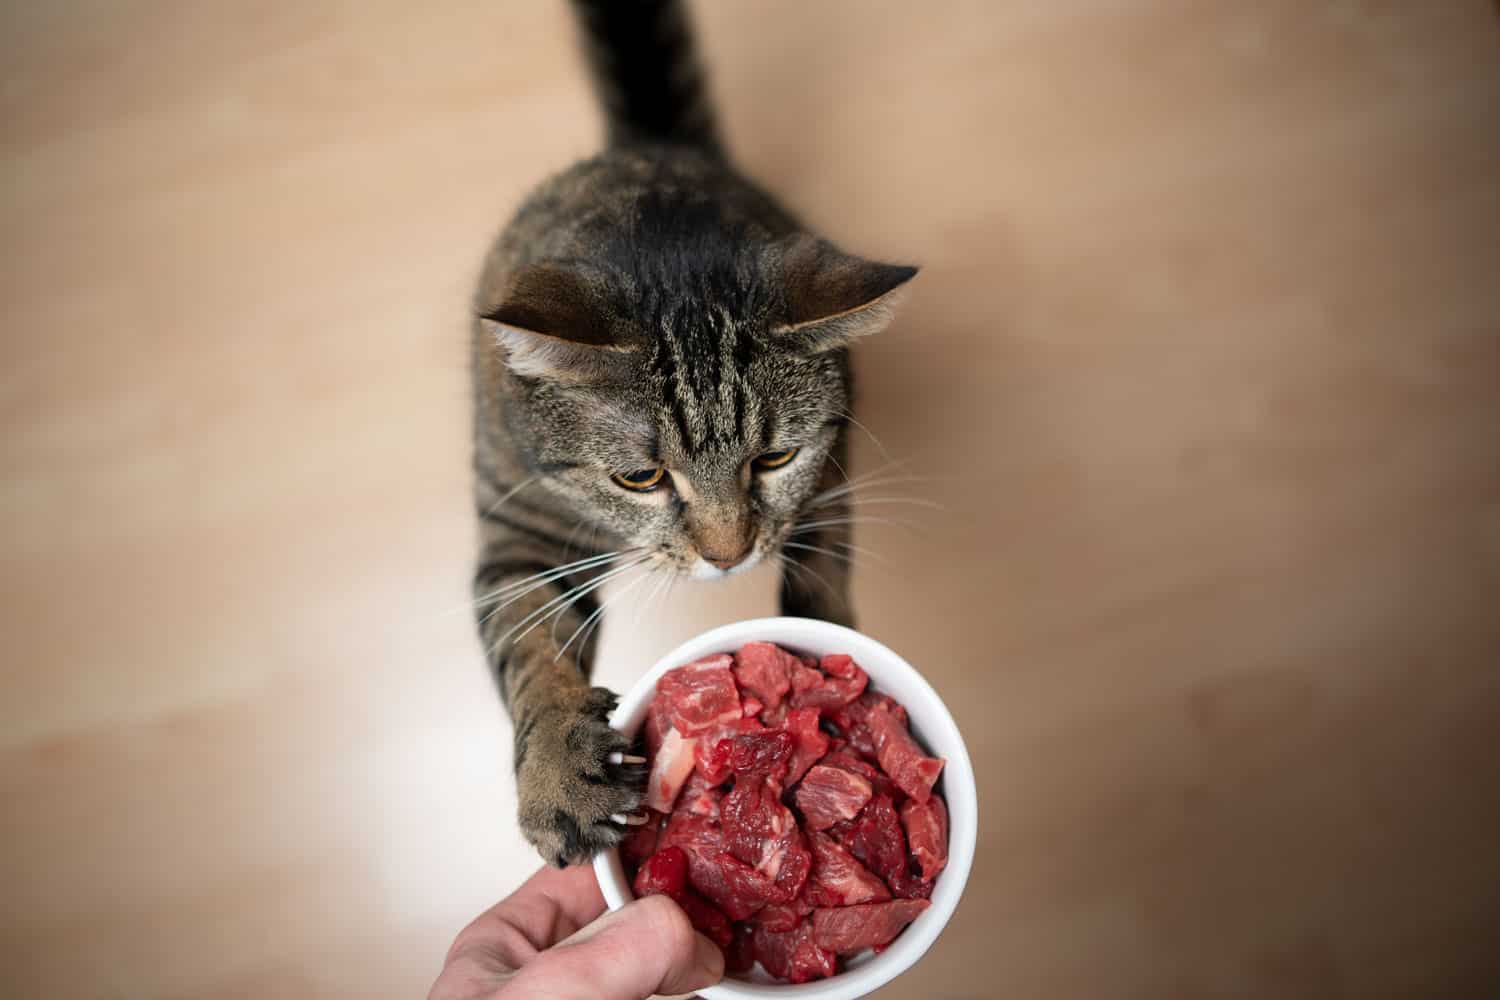 https://thecatsite.com/c/wp-content/uploads/2023/07/tabby-cat-rearing-up-to-reach-feeding-dish-with-raw-meat-held-by-pet-owners-hand.jpg